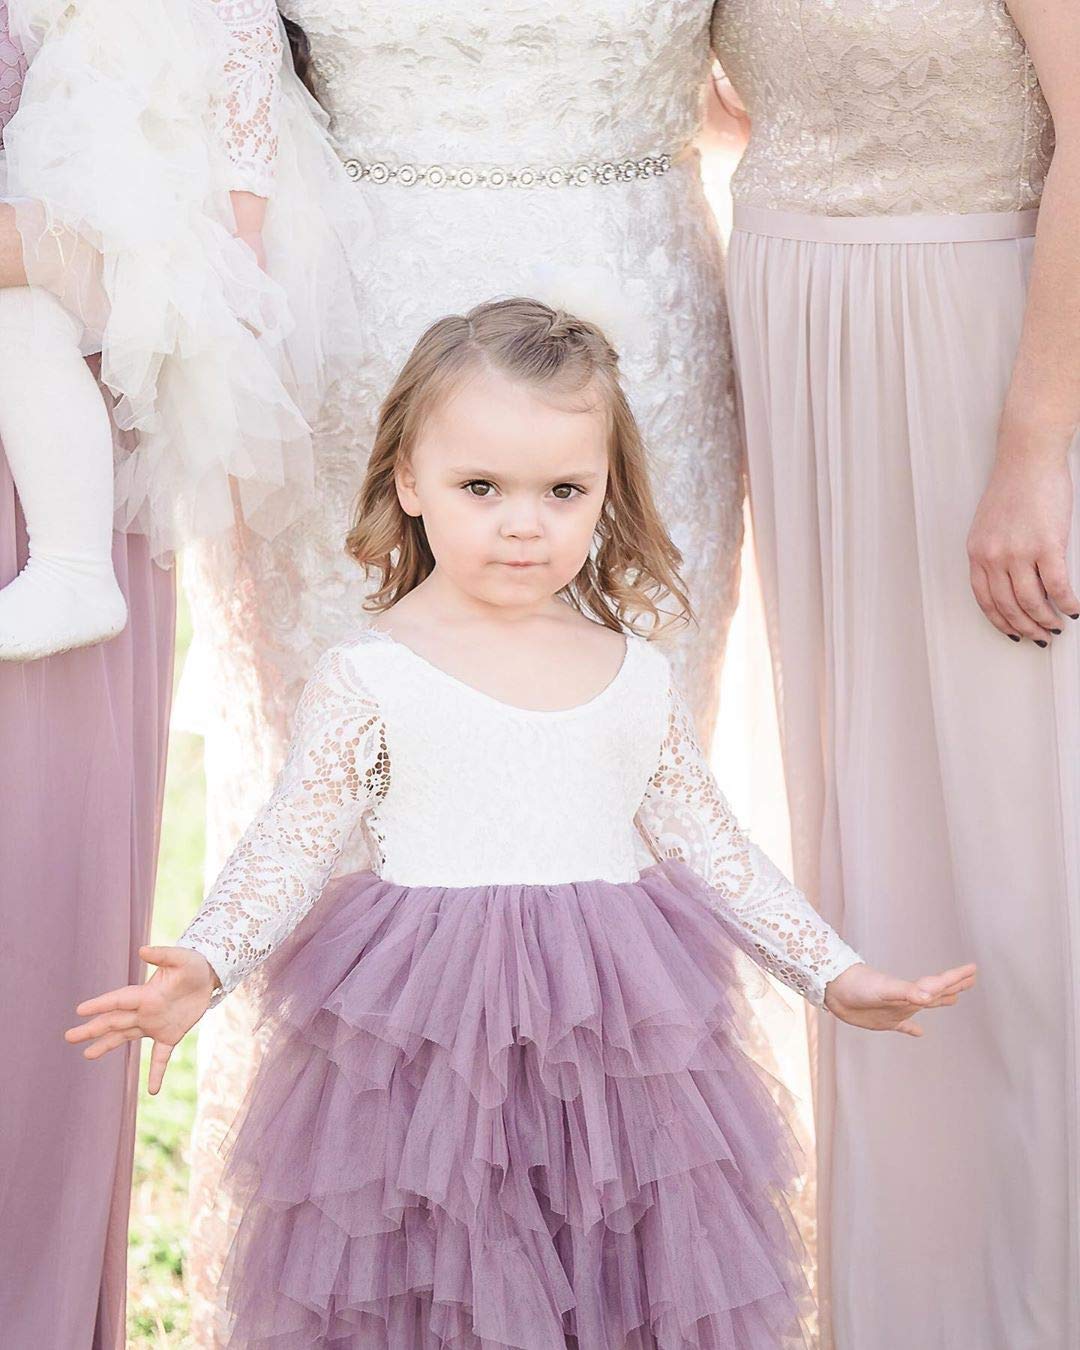 2Bunnies Flower Girl Dress Peony Lace Back A-Line Long Sleeve Tiered Tulle Maxi (Mauve) - 2BUNNIES